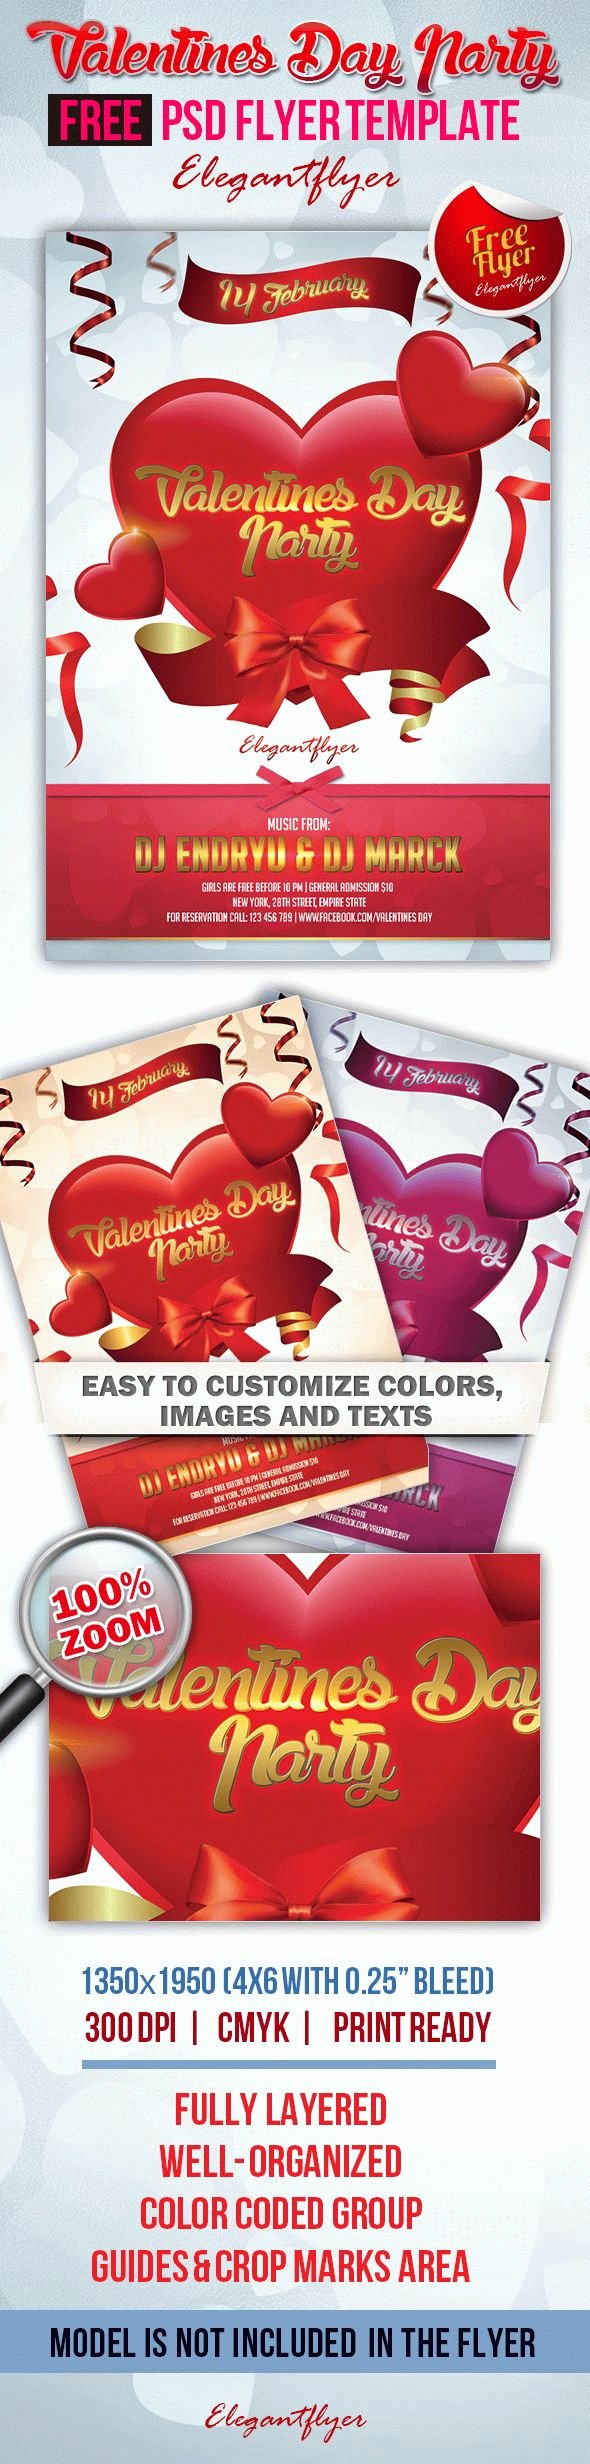 Valentines Day Flyer Template Free Beautiful Poster for Valentines Day Party – by Elegantflyer